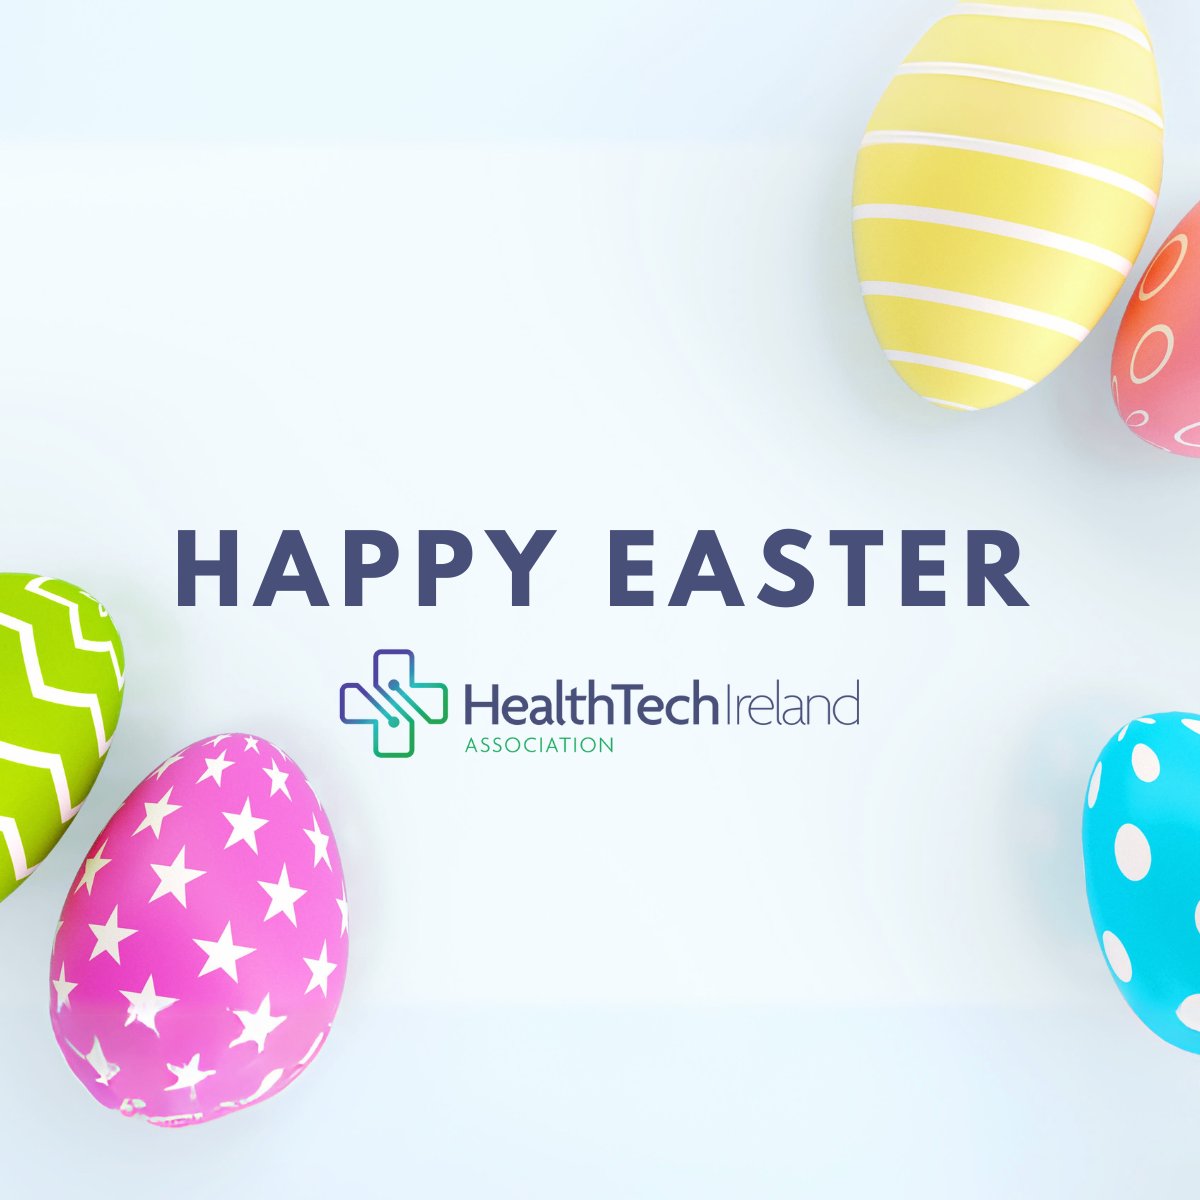 Happy Easter to our members, collaborators & supporters! #HappyEaster #BankHolidayWeekend #healthtech